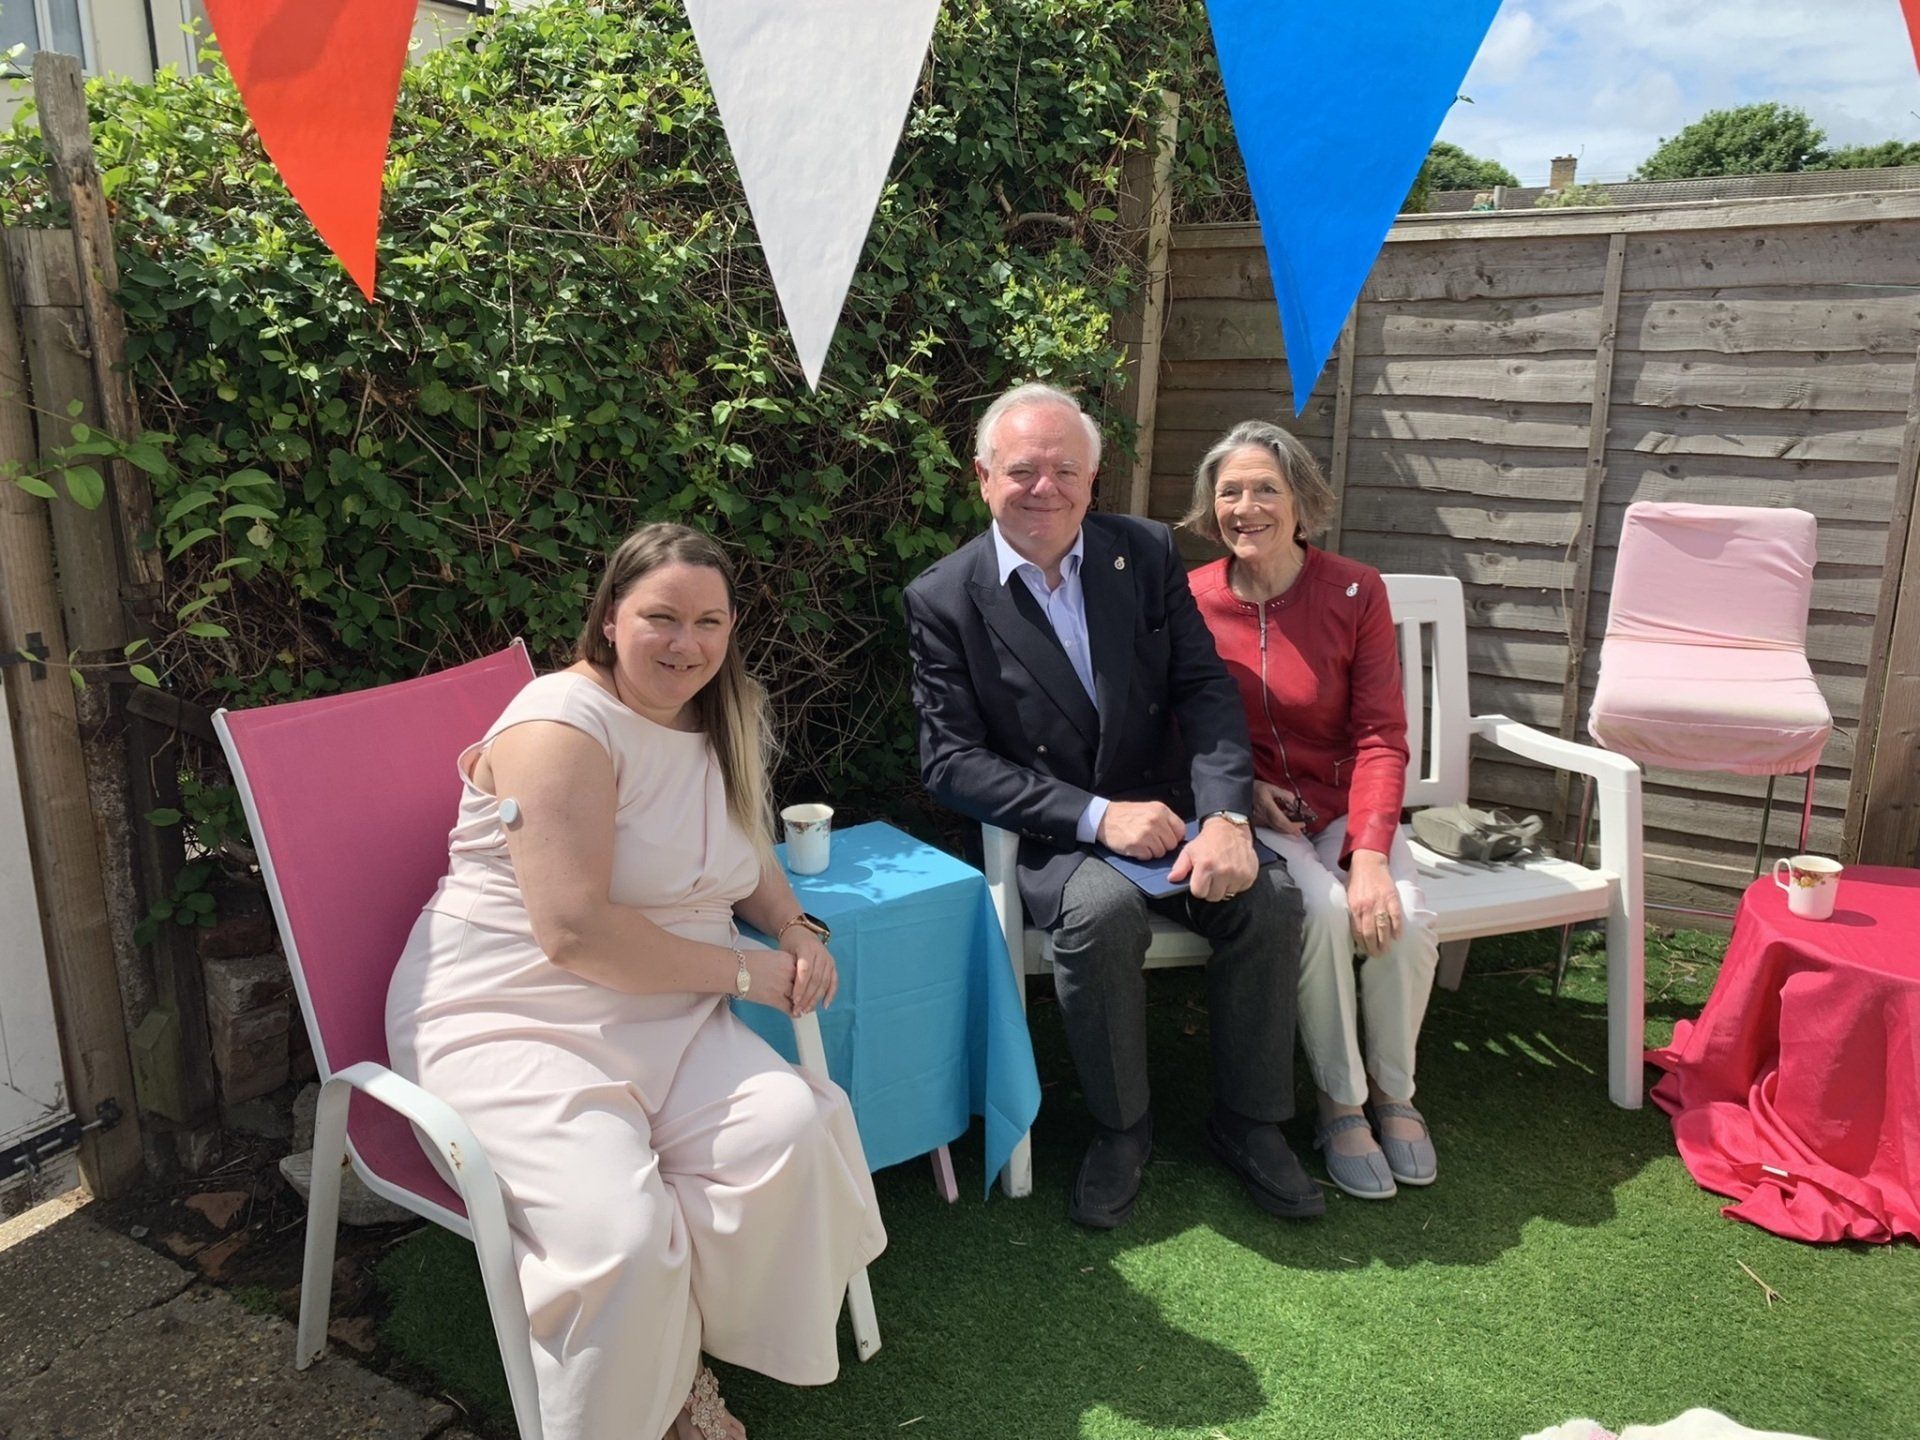 Victoria-Jayne, The High Sherrif and His Wife in the Garden at the home of Legally Powered